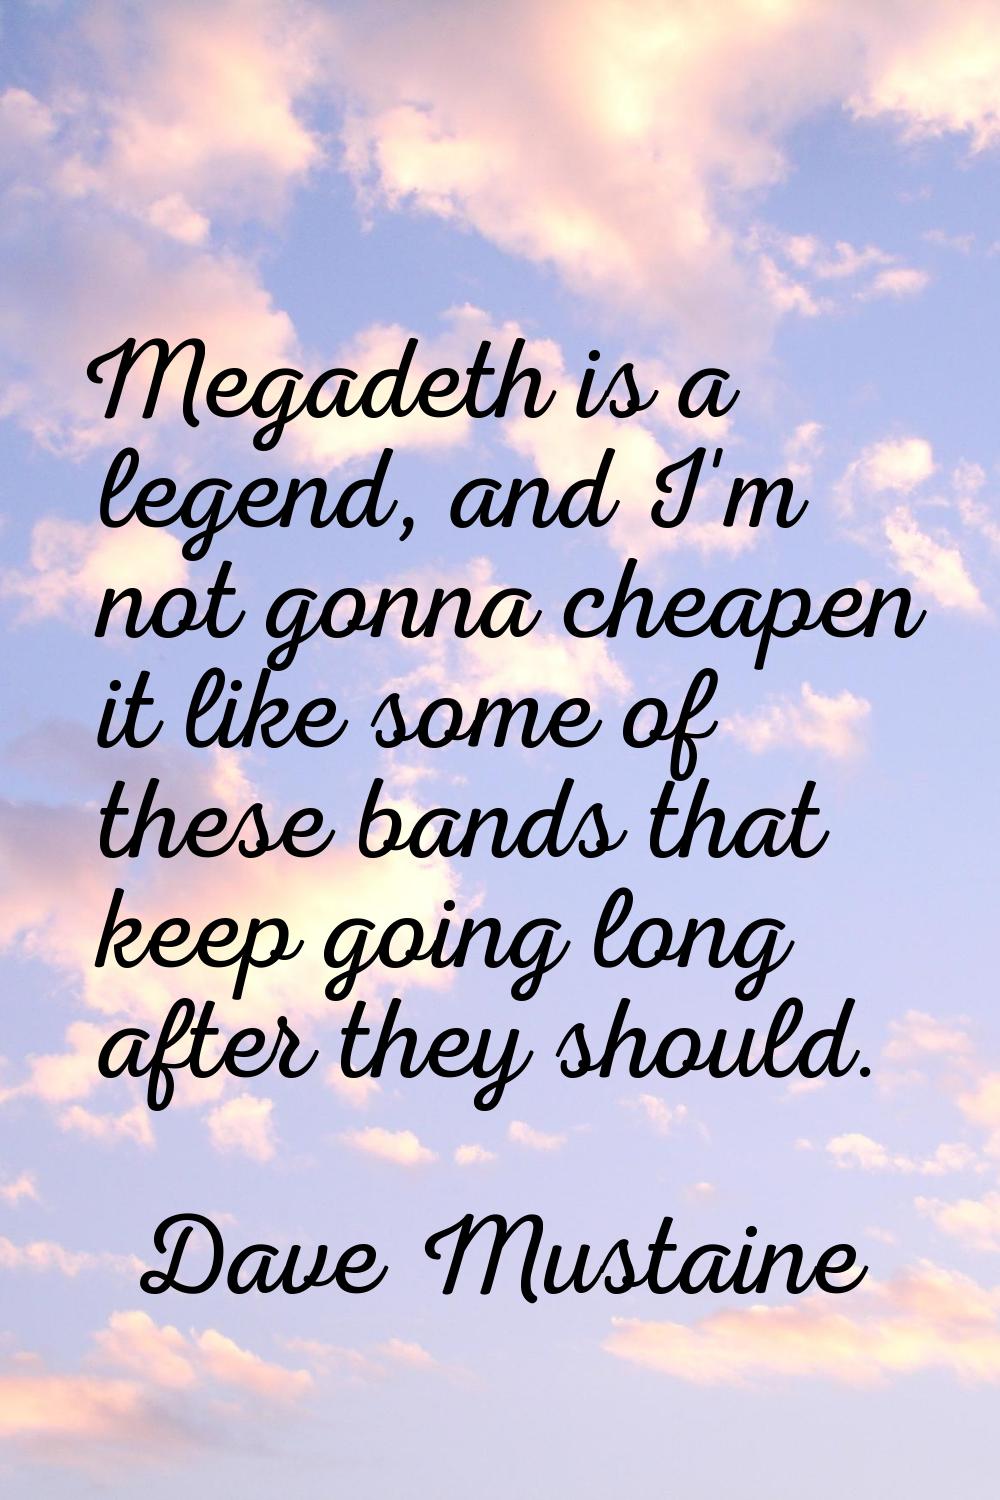 Megadeth is a legend, and I'm not gonna cheapen it like some of these bands that keep going long af